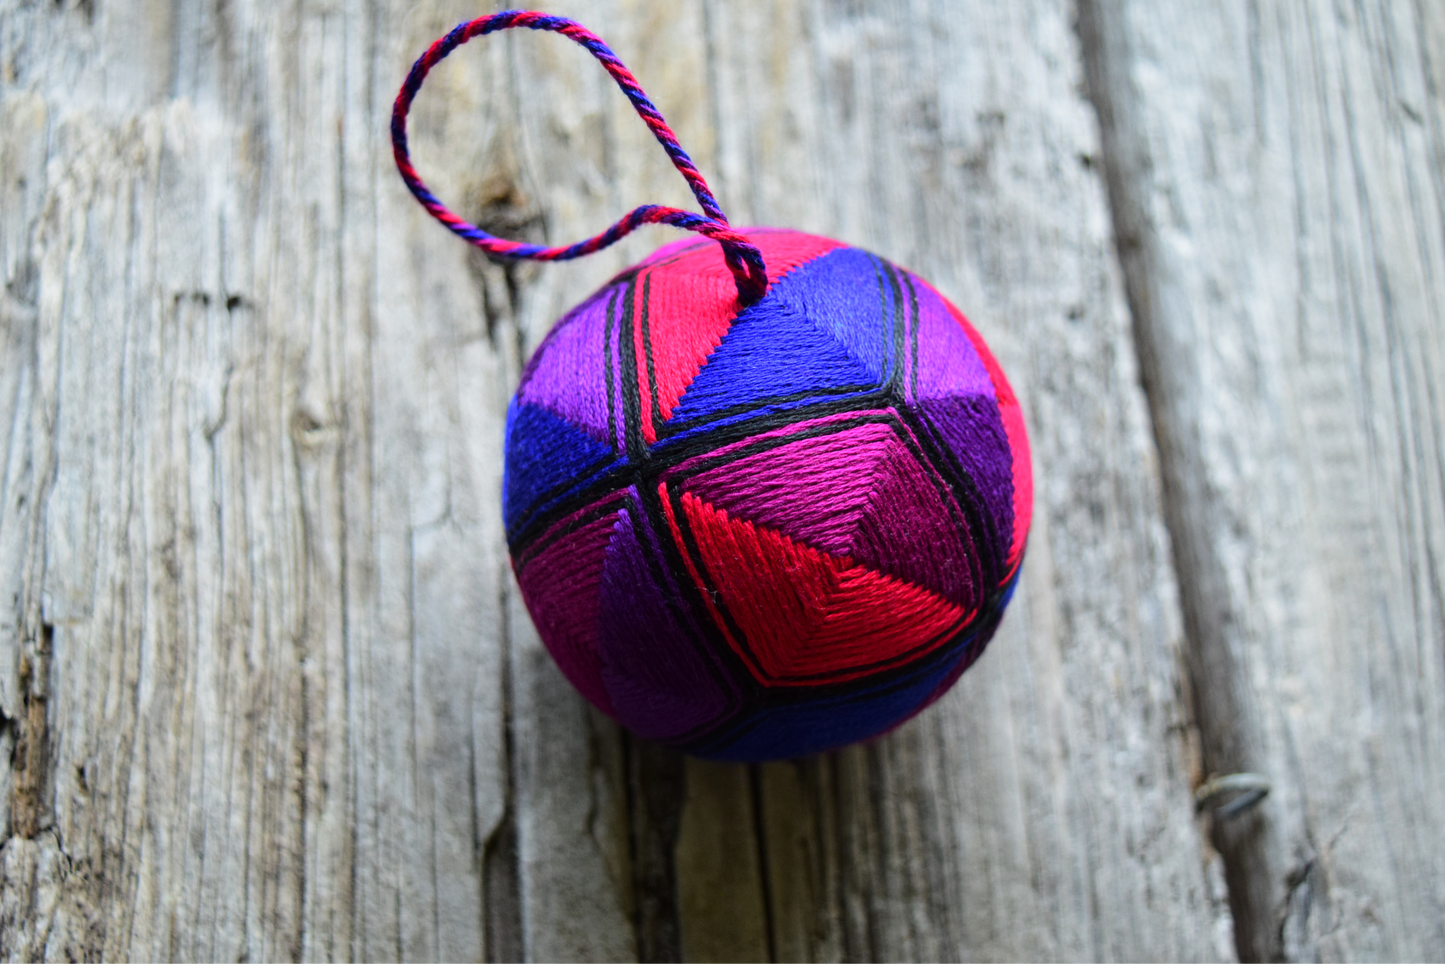 Hand embroidered temari ball in jewel tones with twisted thread hanger. 